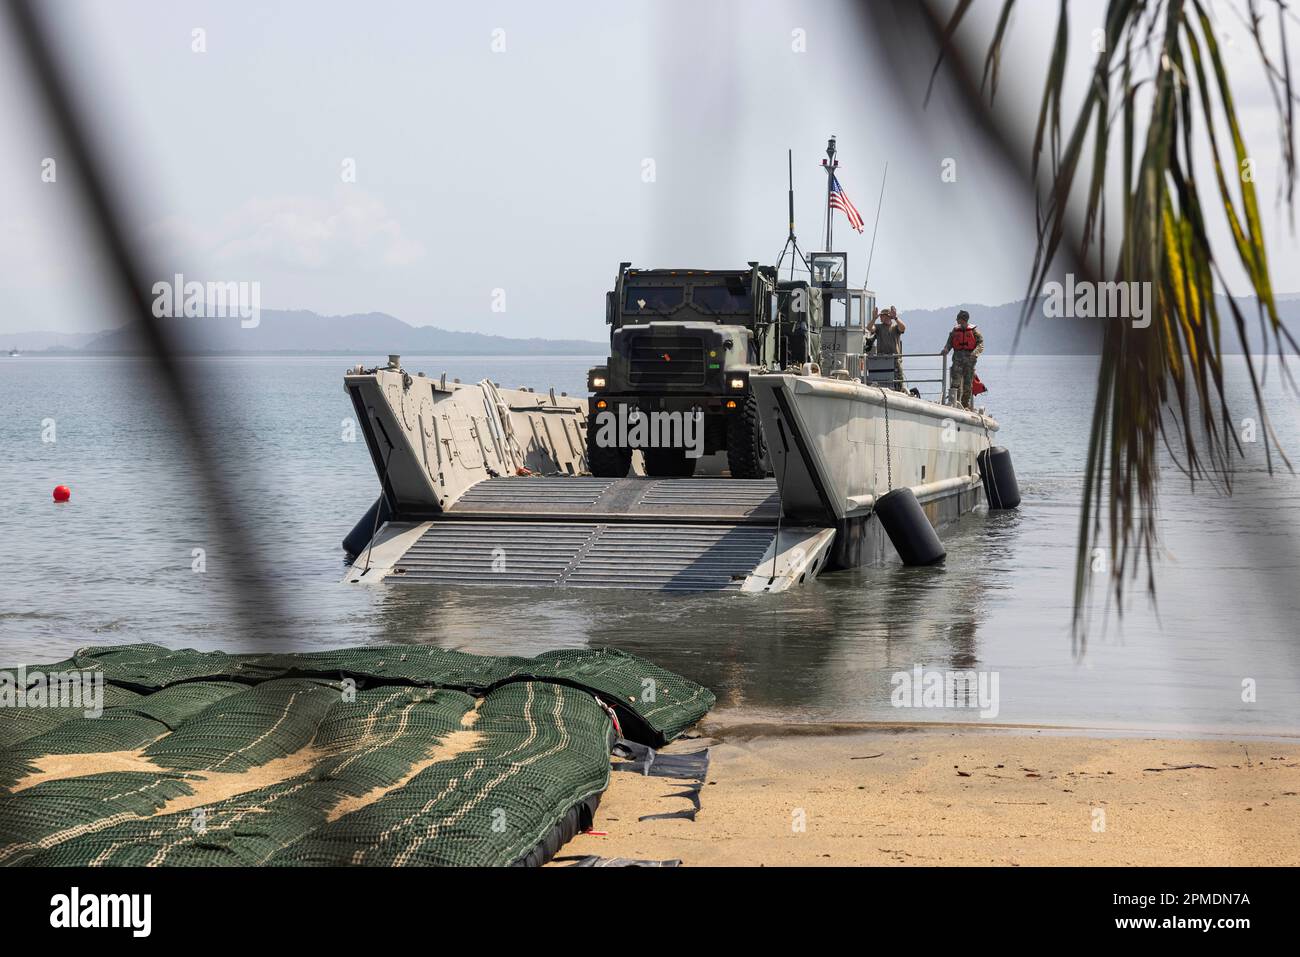 A U.S. Army Landing Craft Mechanized carries a Marine Medium Tactical Vehicle Replacement ashore, in preparation for Balikatan 23 at Camp Agnew, Casiguran, Philippines, April 8, 2023. Balikatan is an annual exercise between the Armed Forces of the Philippines and U.S. military designed to strengthen bilateral interoperability, capabilities, trust, and cooperation built over decades shared experiences. (U.S. Marine Corps photo by Staff Sgt. Danny Gonzalez) Stock Photo